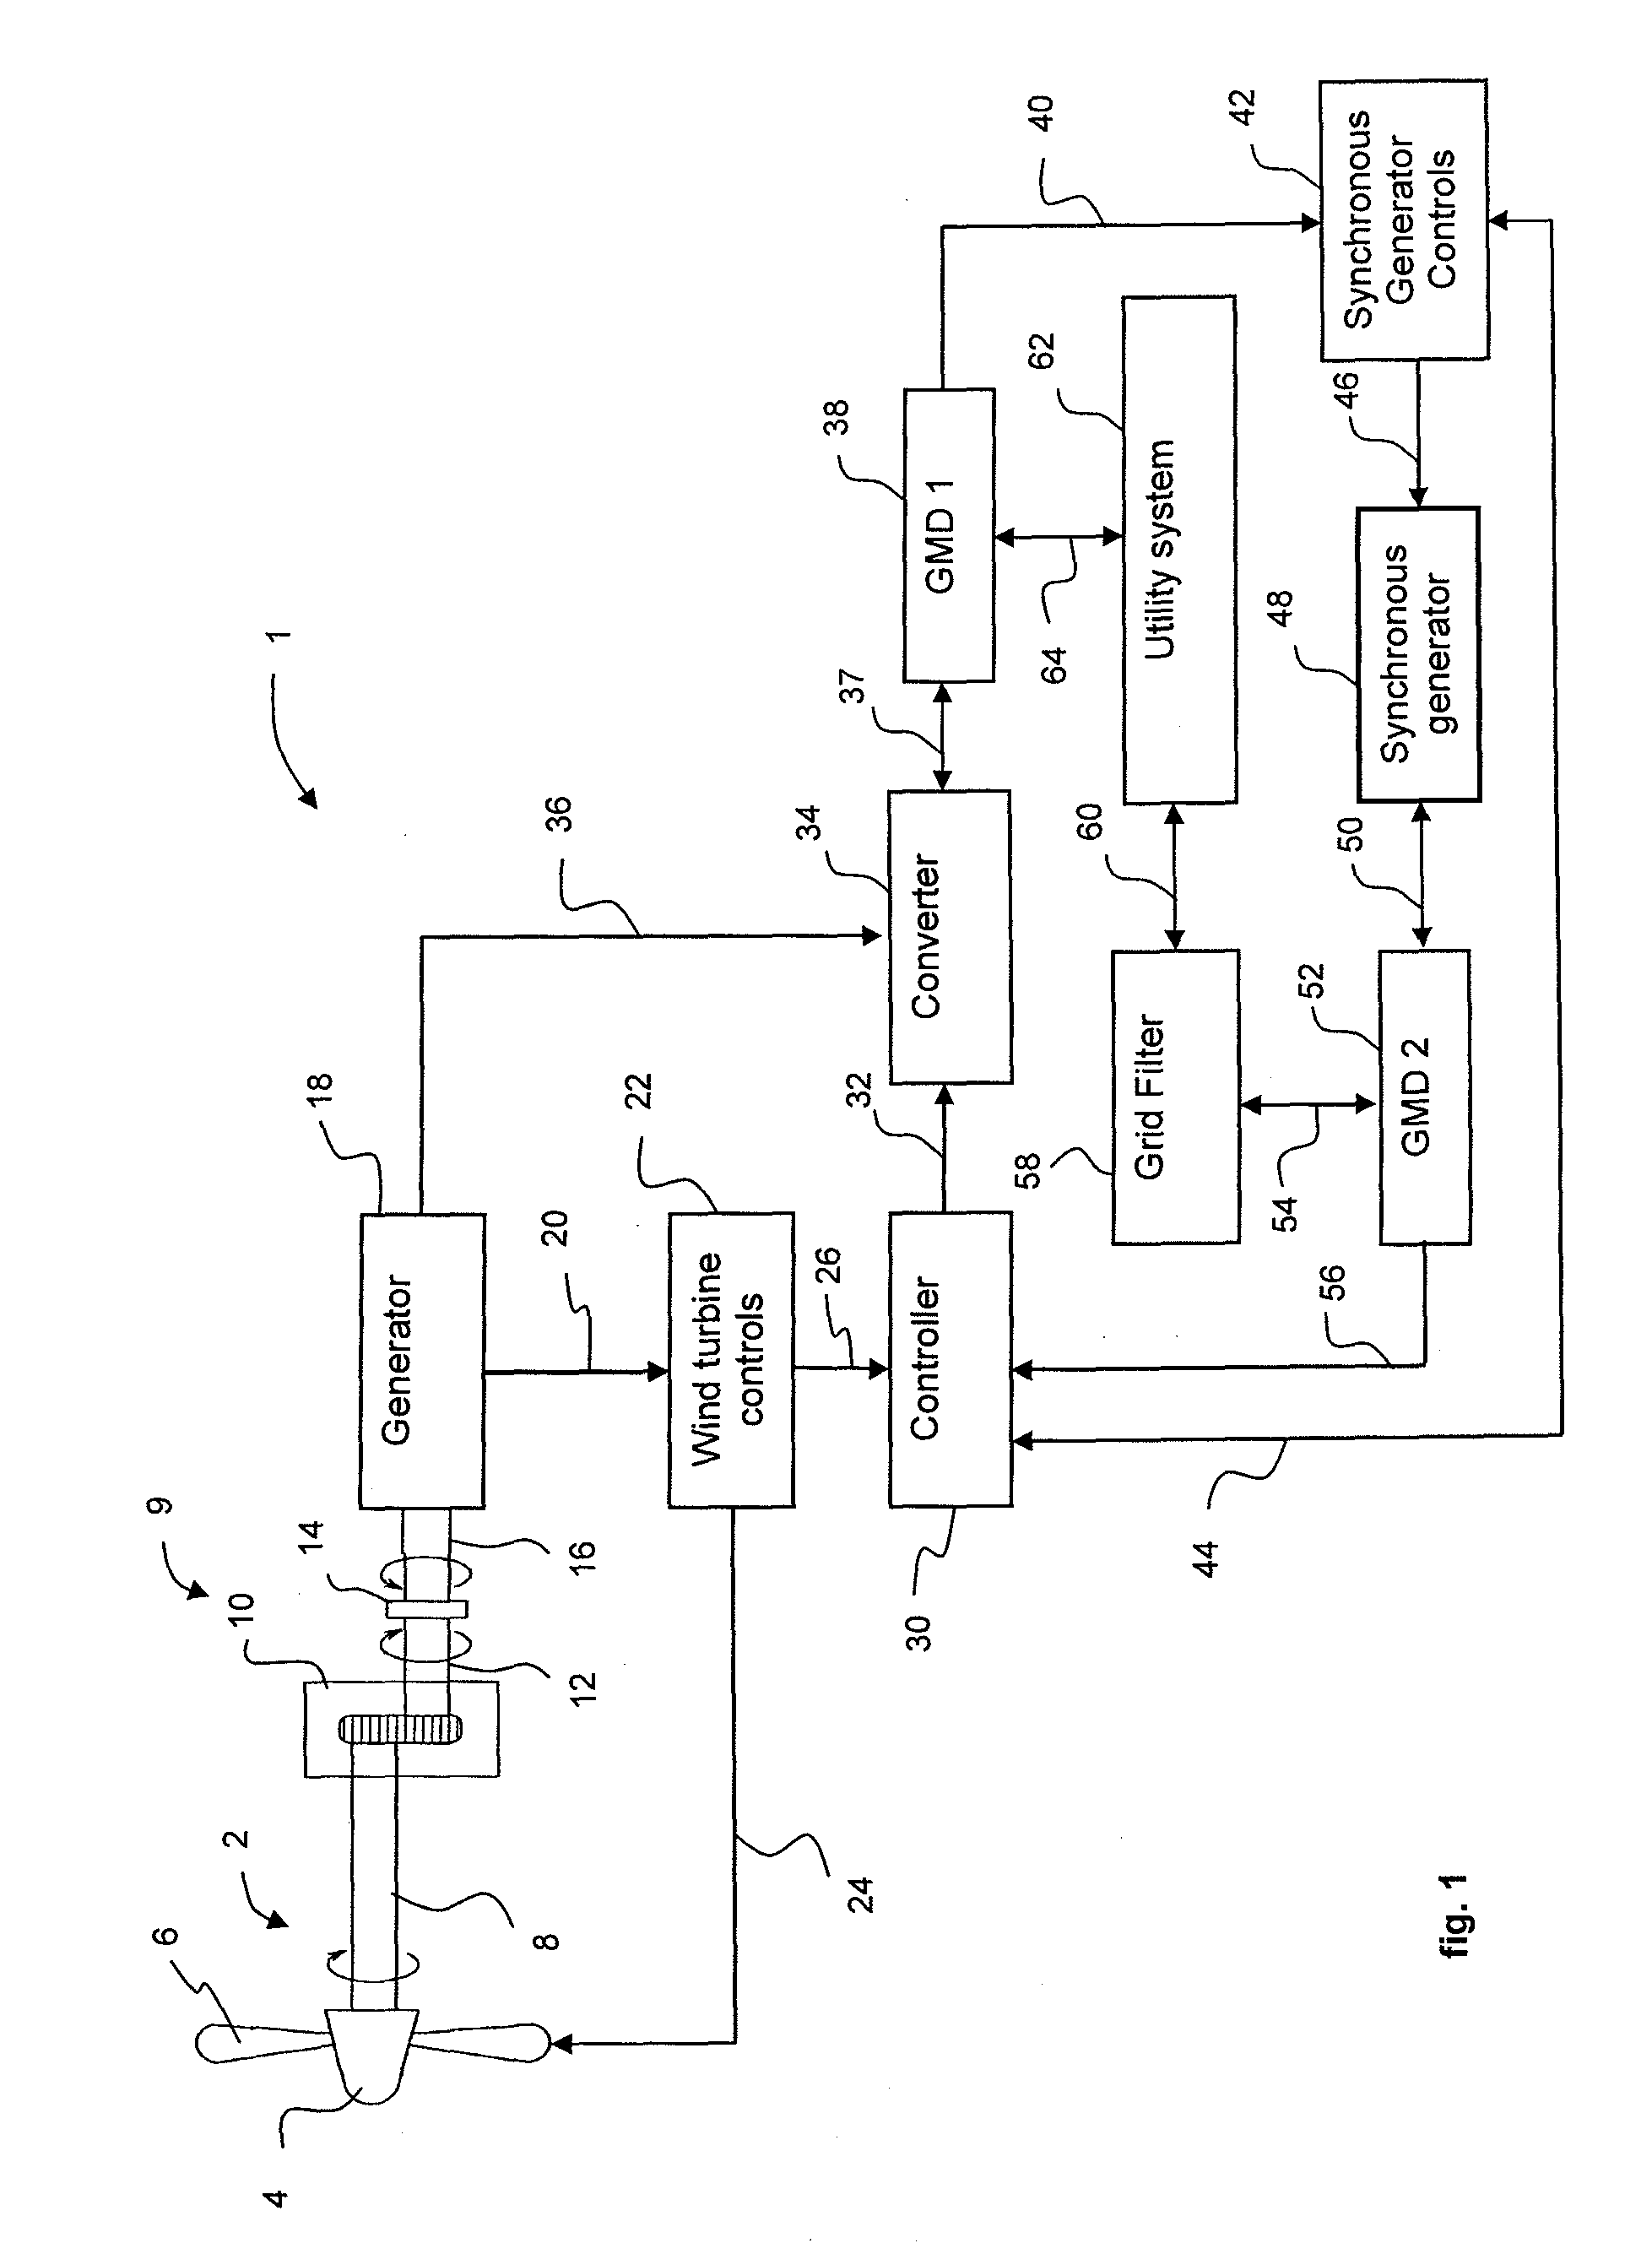 Power System Frequency Inertia for Wind Turbines